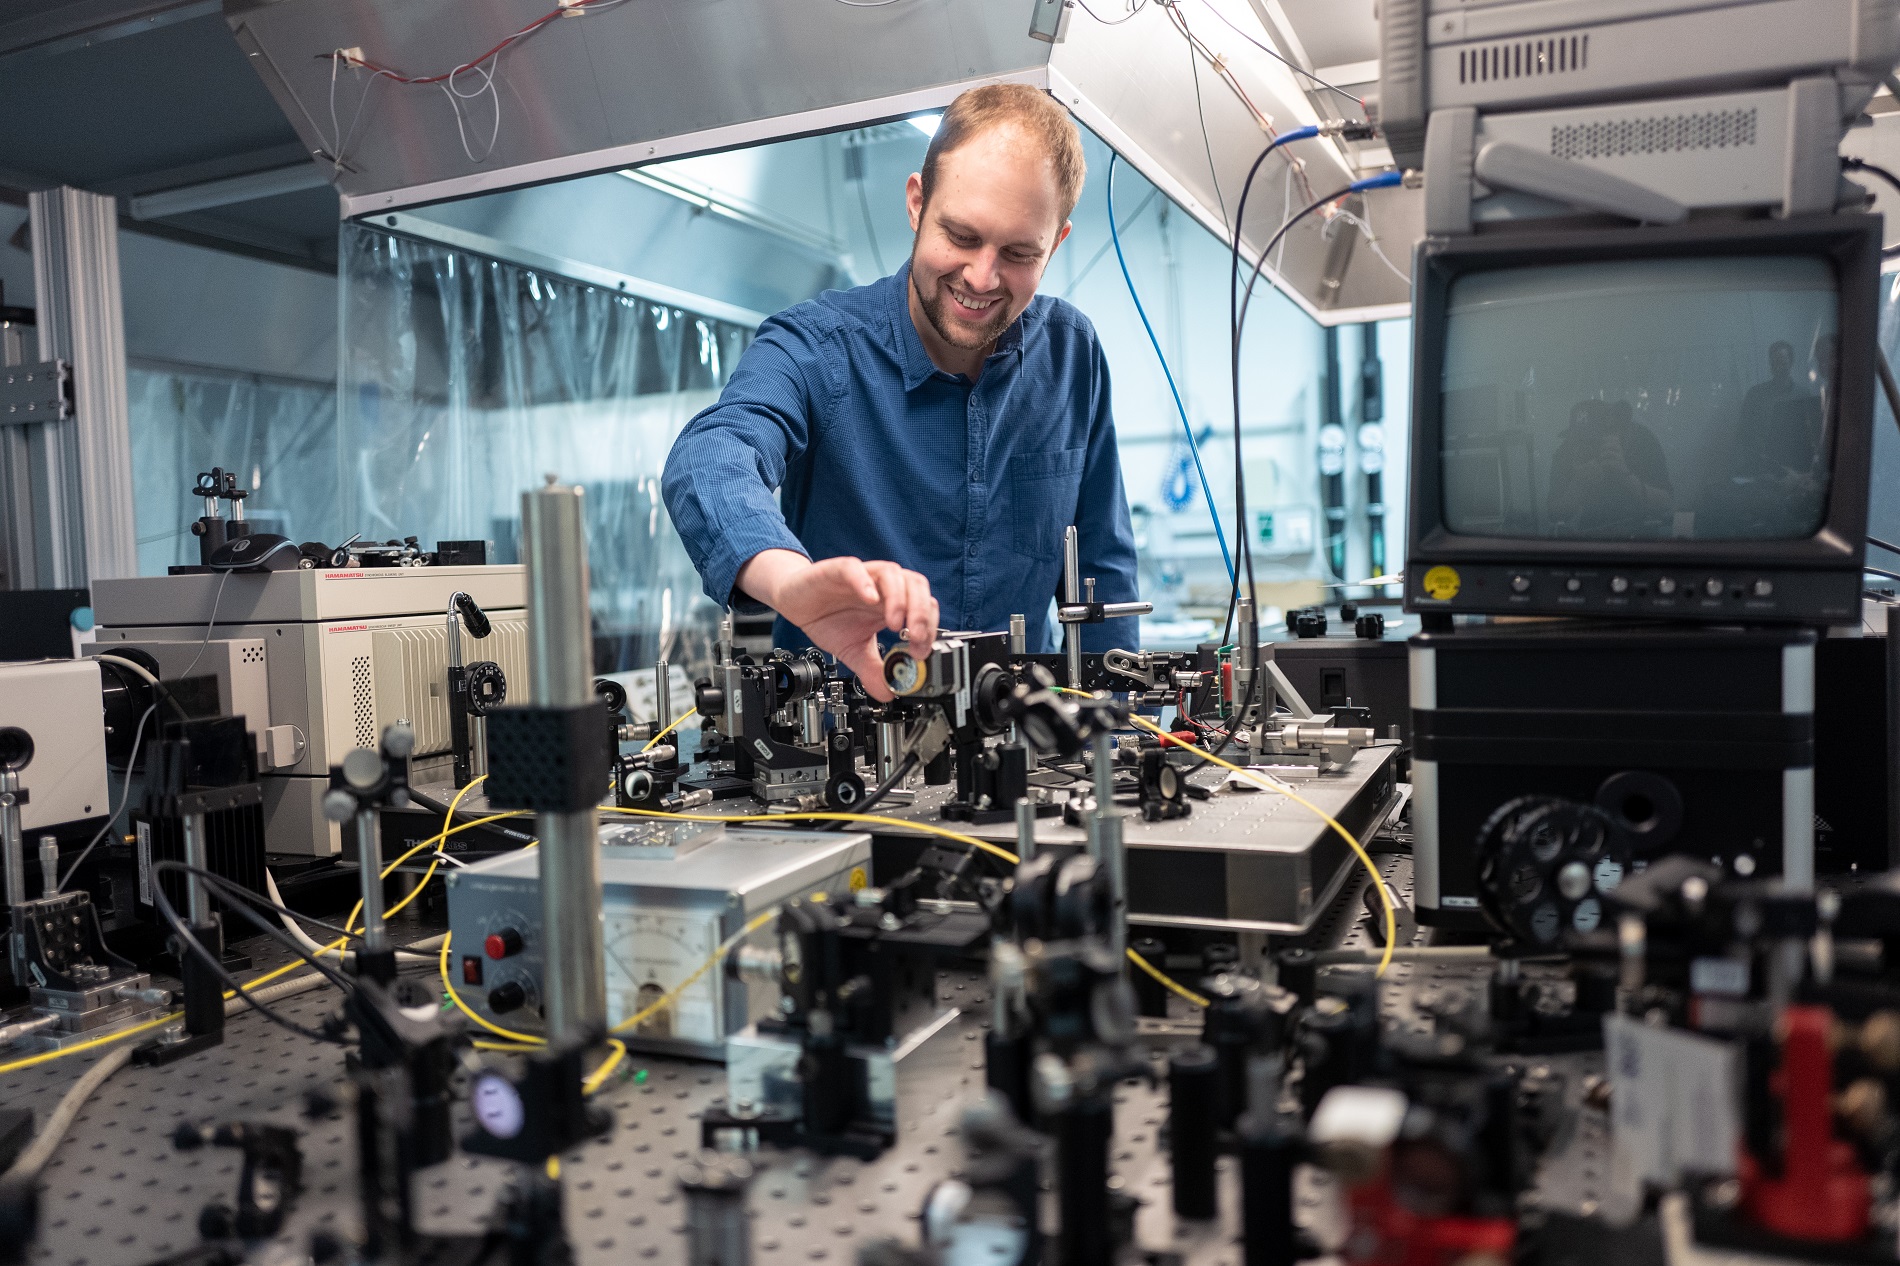 Markus Lindemann is working on the development of ultrafast spin lasers as part of his doctoral thesis.